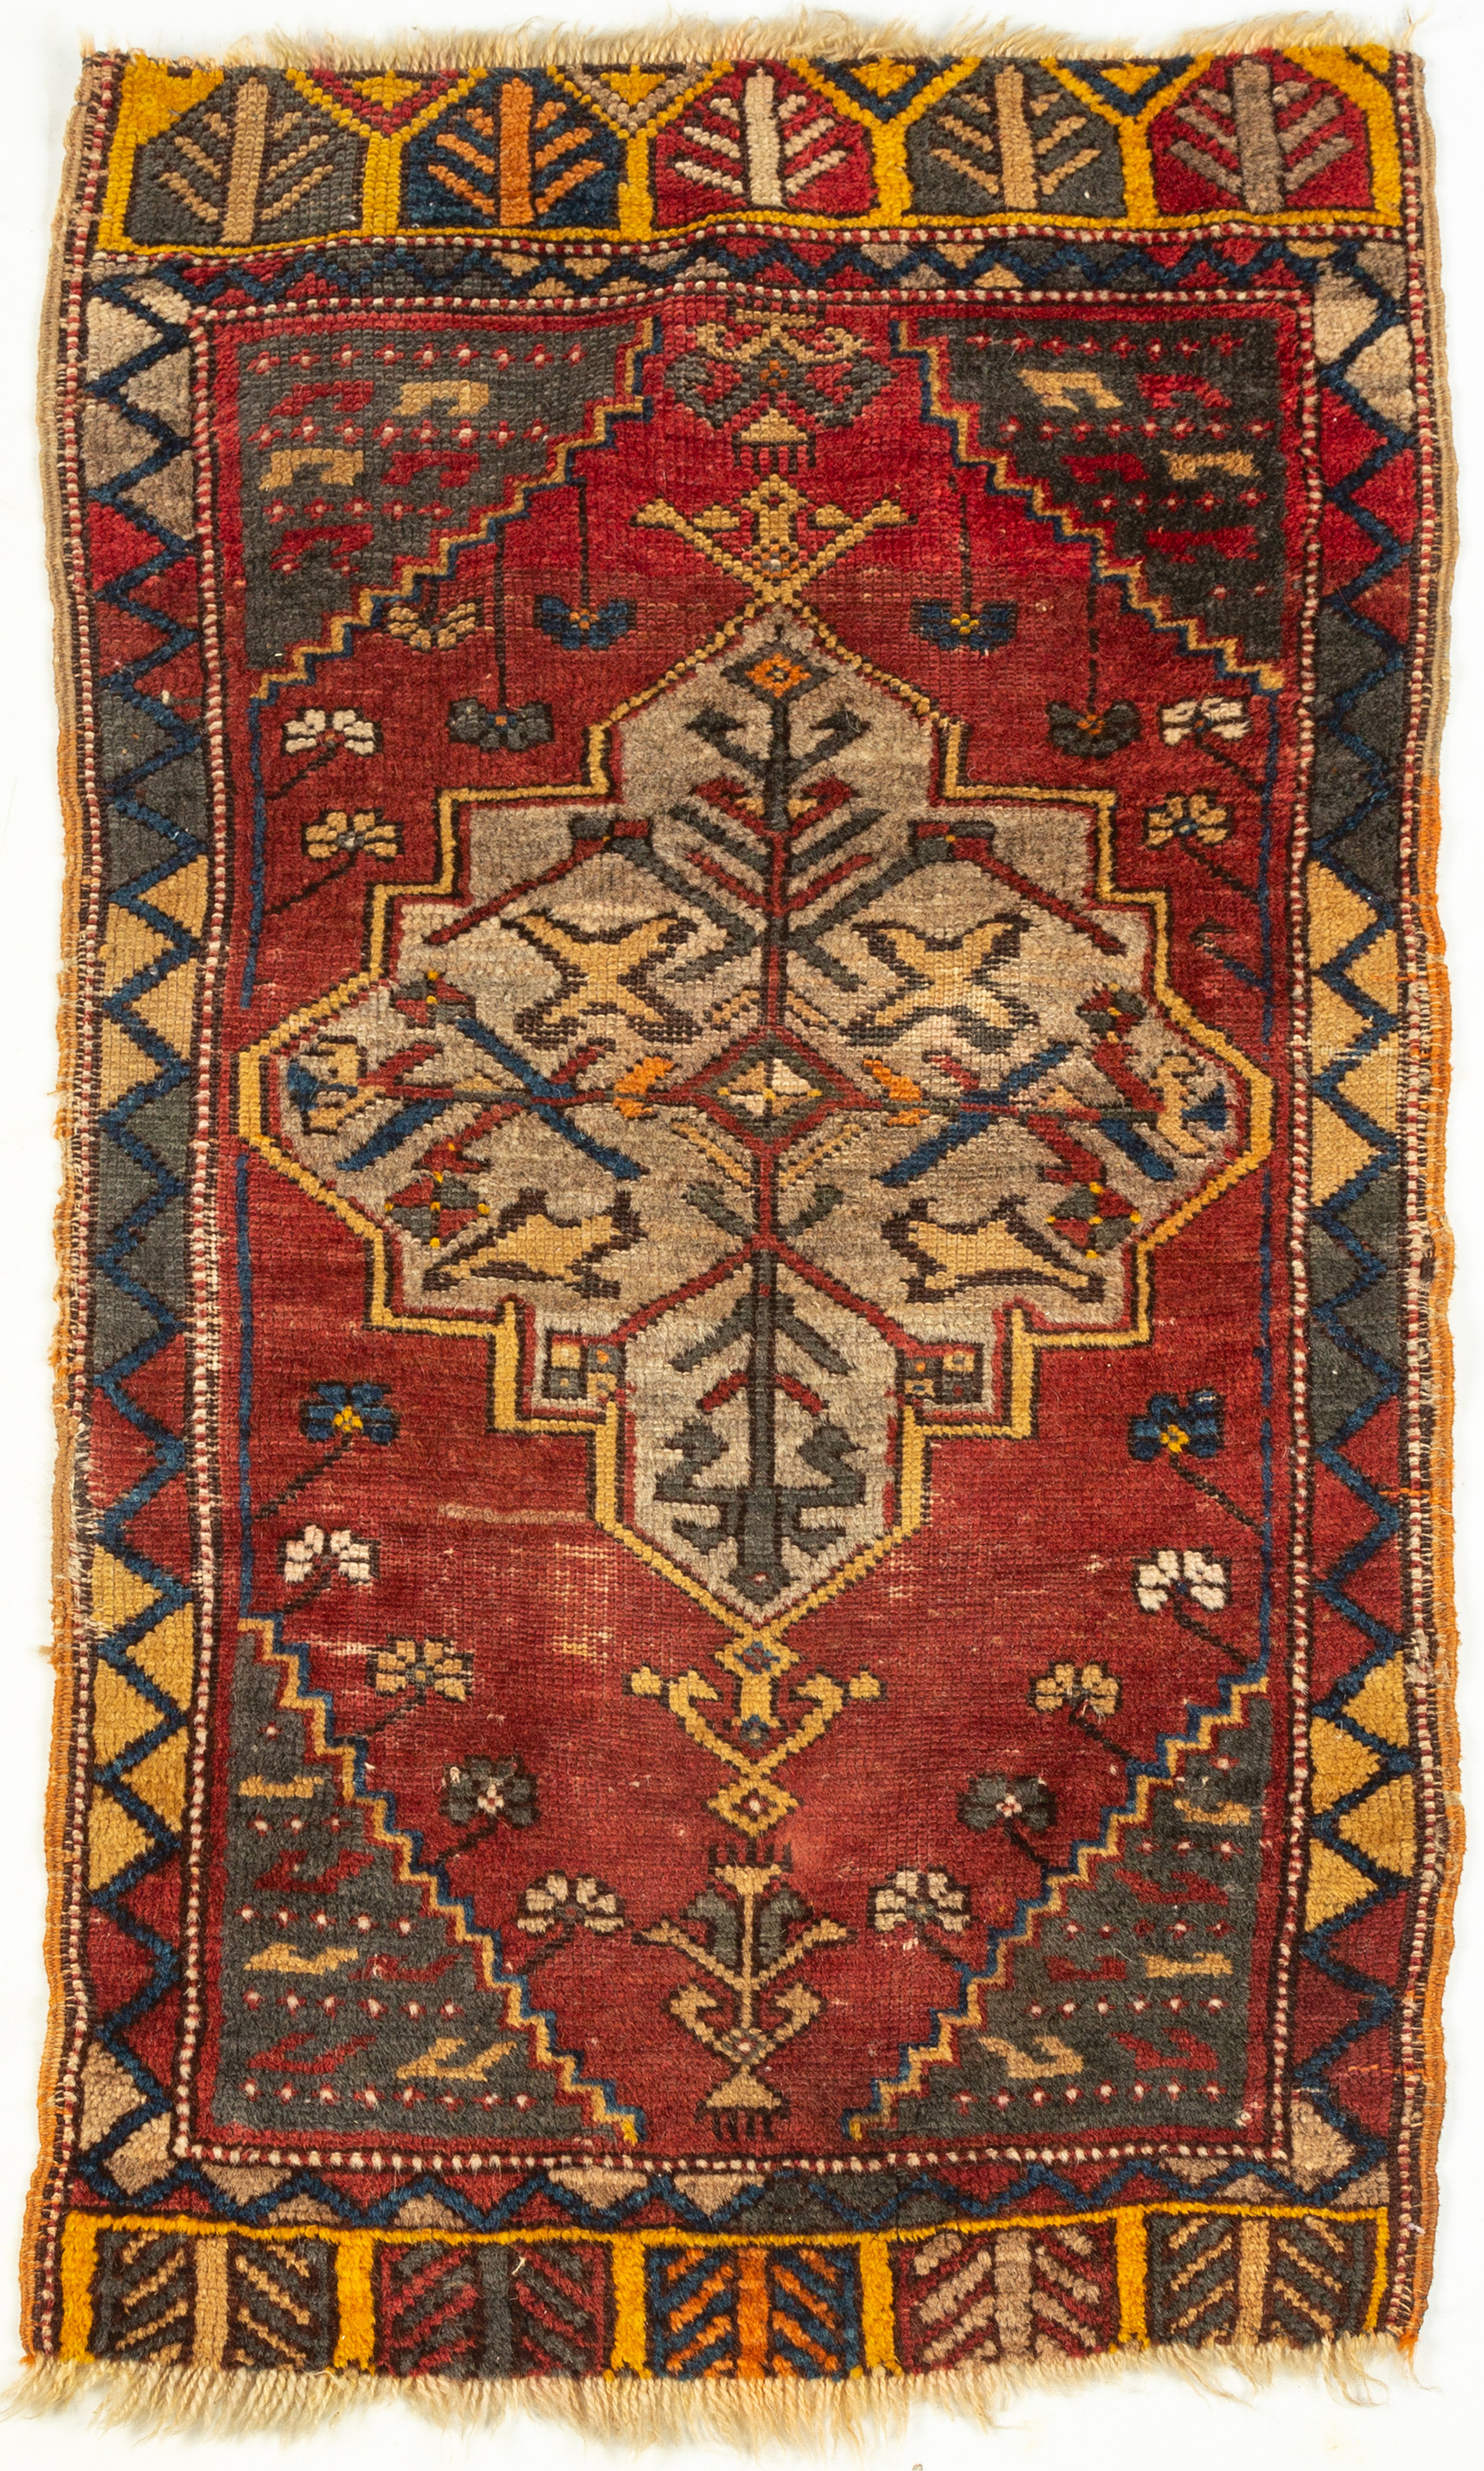  3 ORIENTAL RUGS Early 20th century  28d778